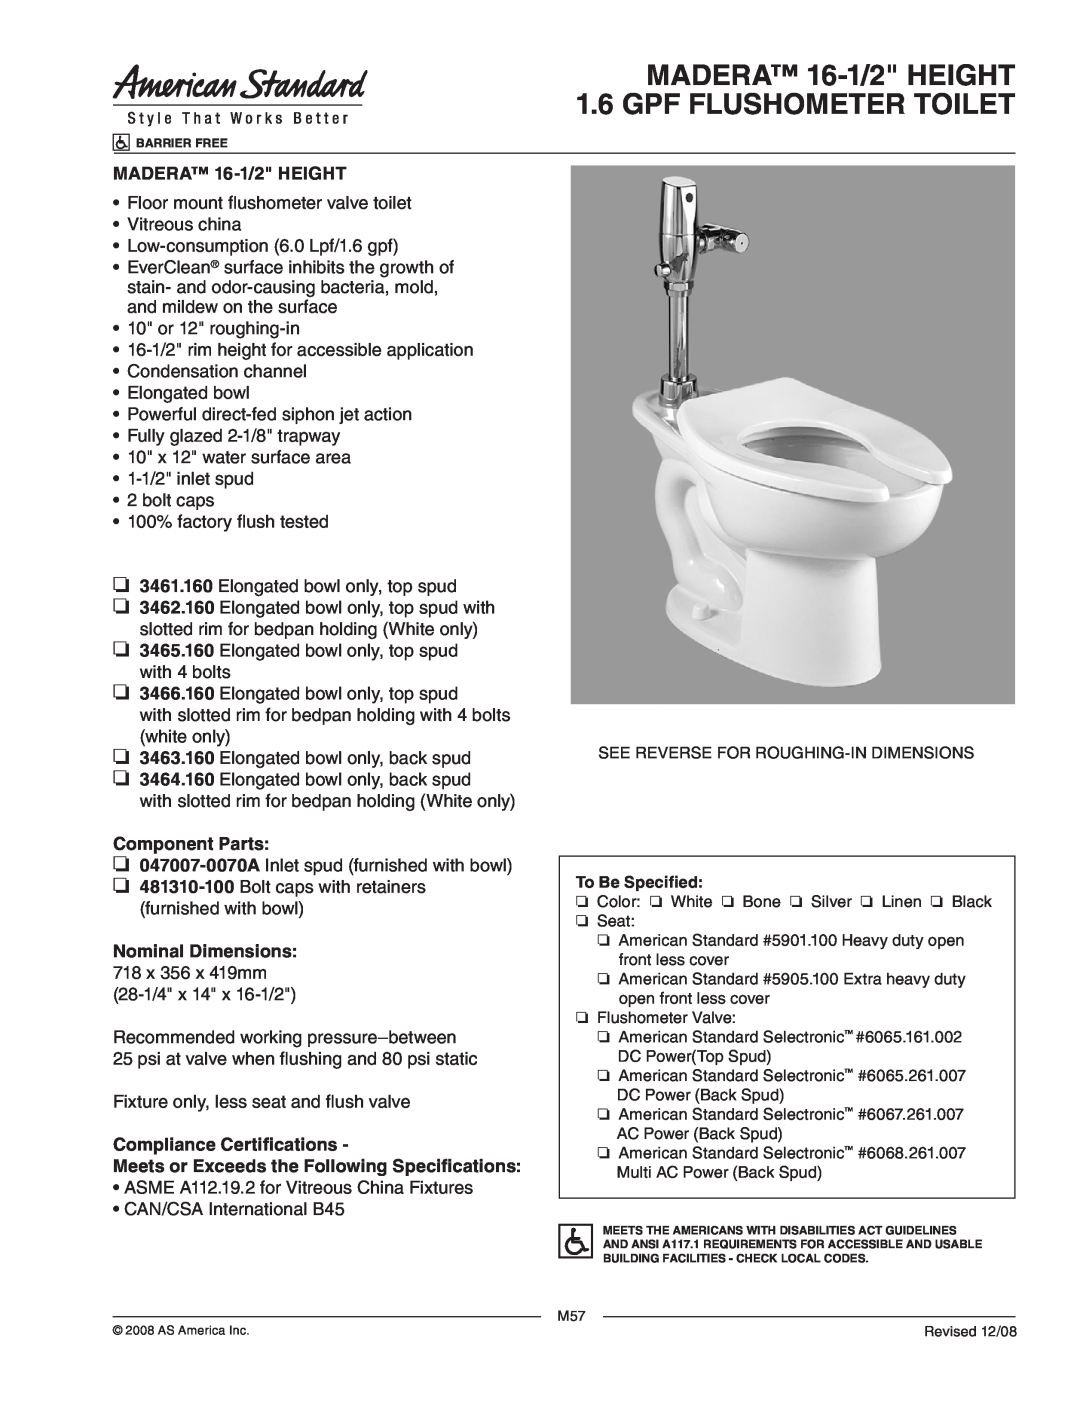 American Standard 3466.160, 3461.160, 3463.160 dimensions MADERA 16-1/2HEIGHT 1.6 GPF FLUSHOMETER TOILET, Component Parts 